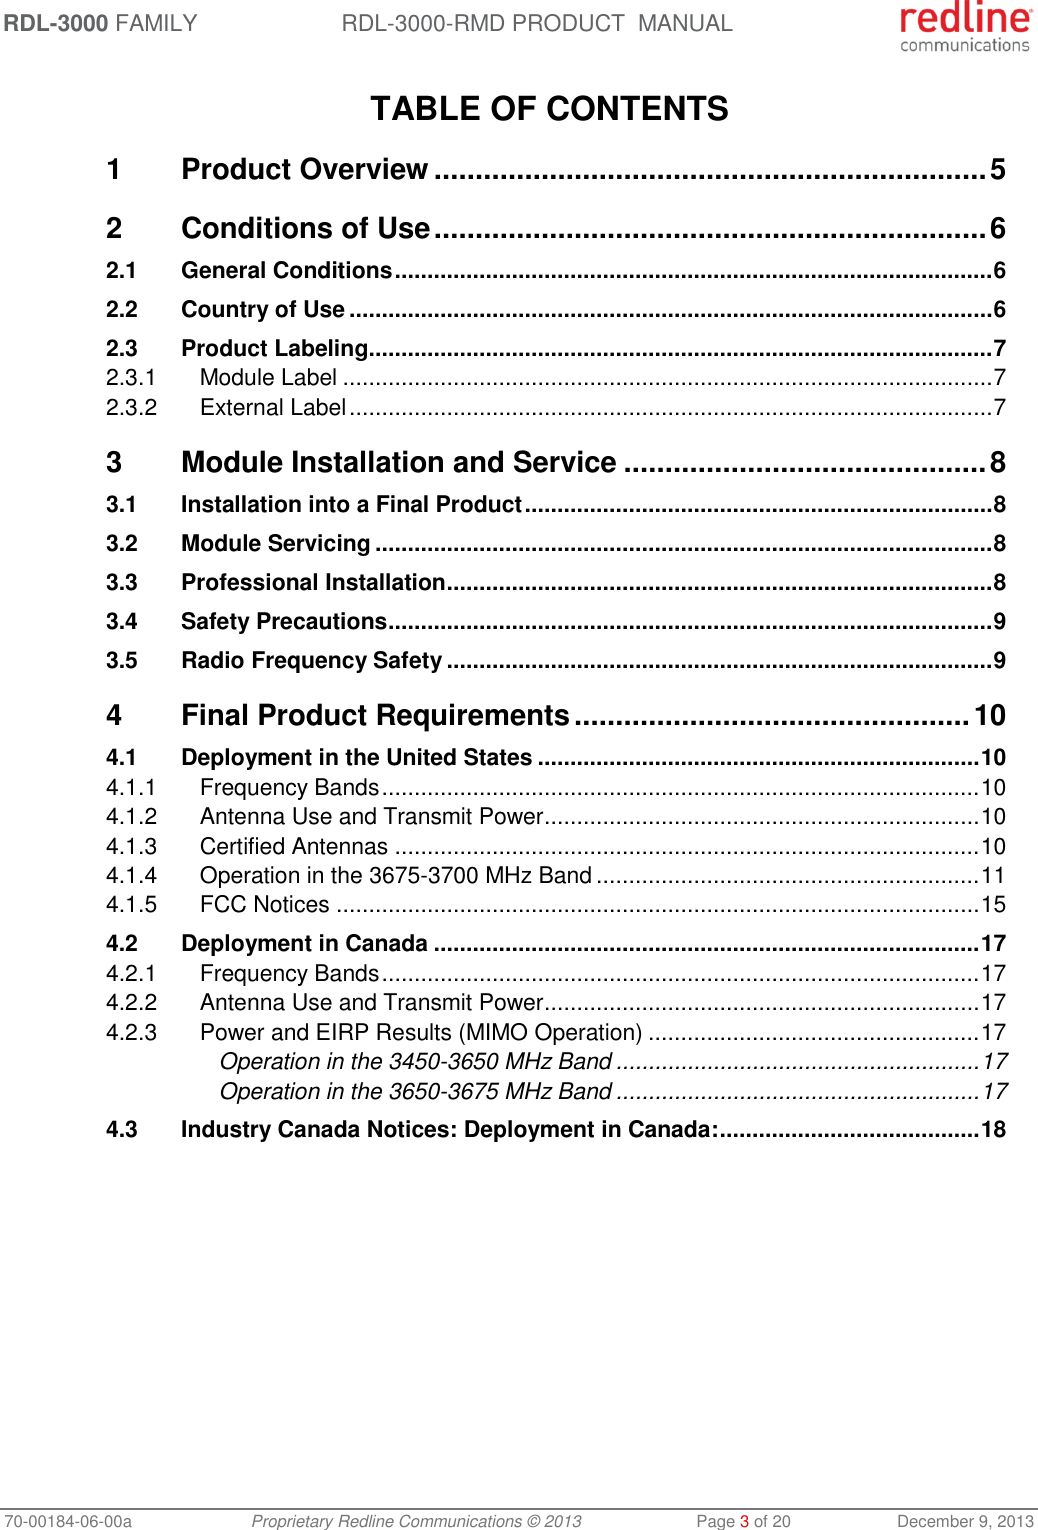 RDL-3000 FAMILY RDL-3000-RMD PRODUCT  MANUAL 70-00184-06-00a  Proprietary Redline Communications © 2013  Page 3 of 20  December 9, 2013  TABLE OF CONTENTS 1 Product Overview ................................................................... 5 2 Conditions of Use ................................................................... 6 2.1 General Conditions ............................................................................................ 6 2.2 Country of Use ................................................................................................... 6 2.3 Product Labeling ................................................................................................ 7 2.3.1 Module Label .................................................................................................... 7 2.3.2 External Label ................................................................................................... 7 3 Module Installation and Service ............................................ 8 3.1 Installation into a Final Product ........................................................................ 8 3.2 Module Servicing ............................................................................................... 8 3.3 Professional Installation .................................................................................... 8 3.4 Safety Precautions ............................................................................................. 9 3.5 Radio Frequency Safety .................................................................................... 9 4 Final Product Requirements ................................................ 10 4.1 Deployment in the United States .................................................................... 10 4.1.1 Frequency Bands ............................................................................................ 10 4.1.2 Antenna Use and Transmit Power ................................................................... 10 4.1.3 Certified Antennas .......................................................................................... 10 4.1.4 Operation in the 3675-3700 MHz Band ........................................................... 11 4.1.5 FCC Notices ................................................................................................... 15 4.2 Deployment in Canada .................................................................................... 17 4.2.1 Frequency Bands ............................................................................................ 17 4.2.2 Antenna Use and Transmit Power ................................................................... 17 4.2.3 Power and EIRP Results (MIMO Operation) ................................................... 17 Operation in the 3450-3650 MHz Band ........................................................ 17 Operation in the 3650-3675 MHz Band ........................................................ 17 4.3 Industry Canada Notices: Deployment in Canada: ........................................ 18   